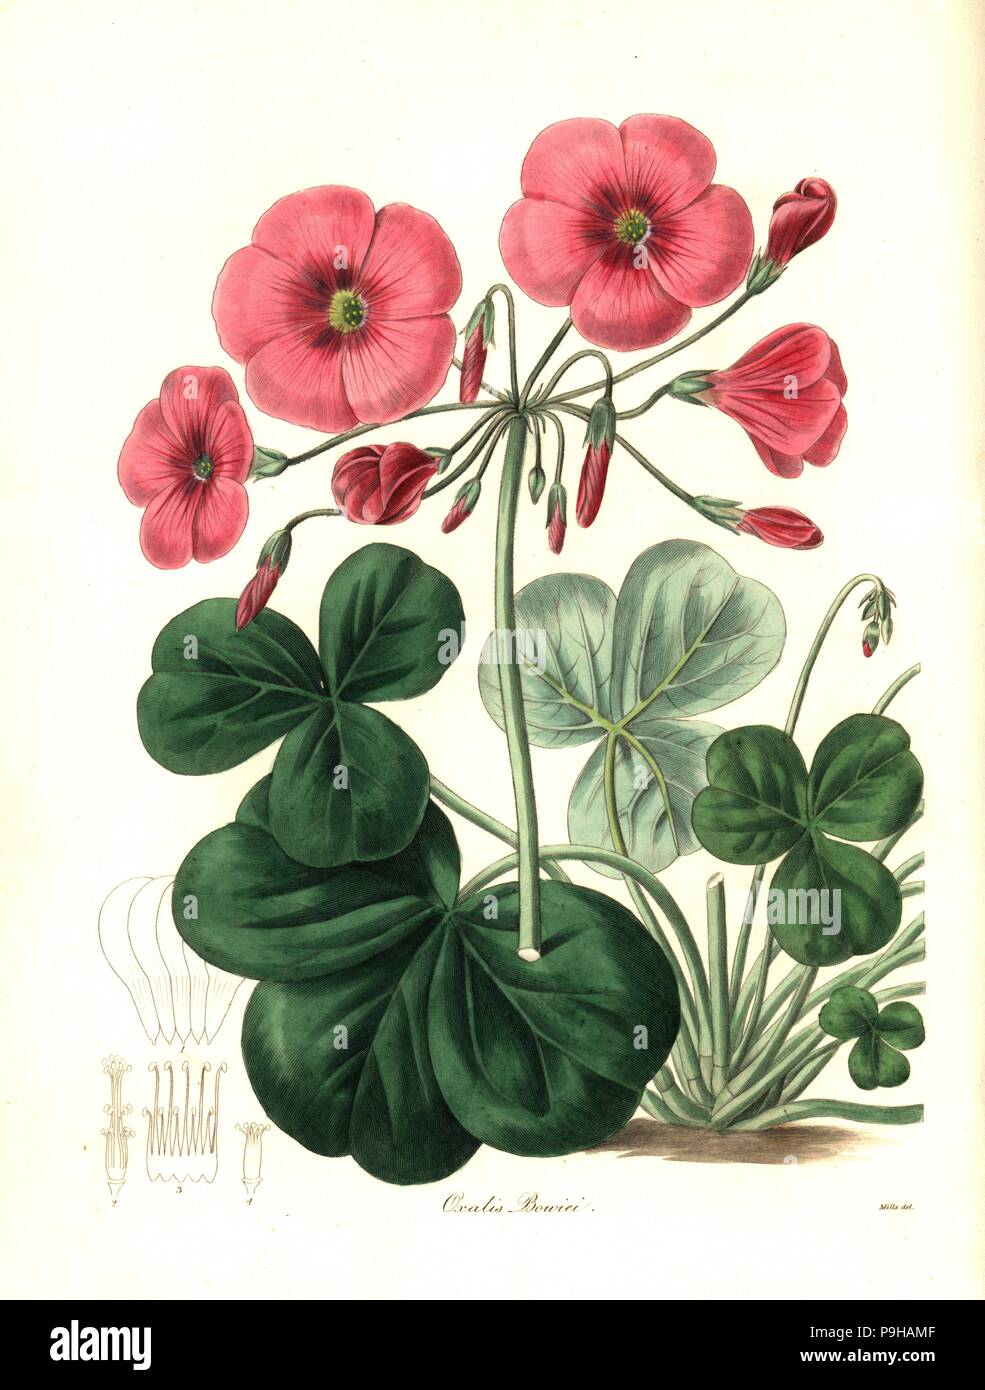 Bowie's oxalis, Oxalis bowiei. Handcoloured copperplate engraving after a botanical illustration by Mills from Benjamin Maund and the Rev. John Stevens Henslow's The Botanist, London, 1836. Stock Photo